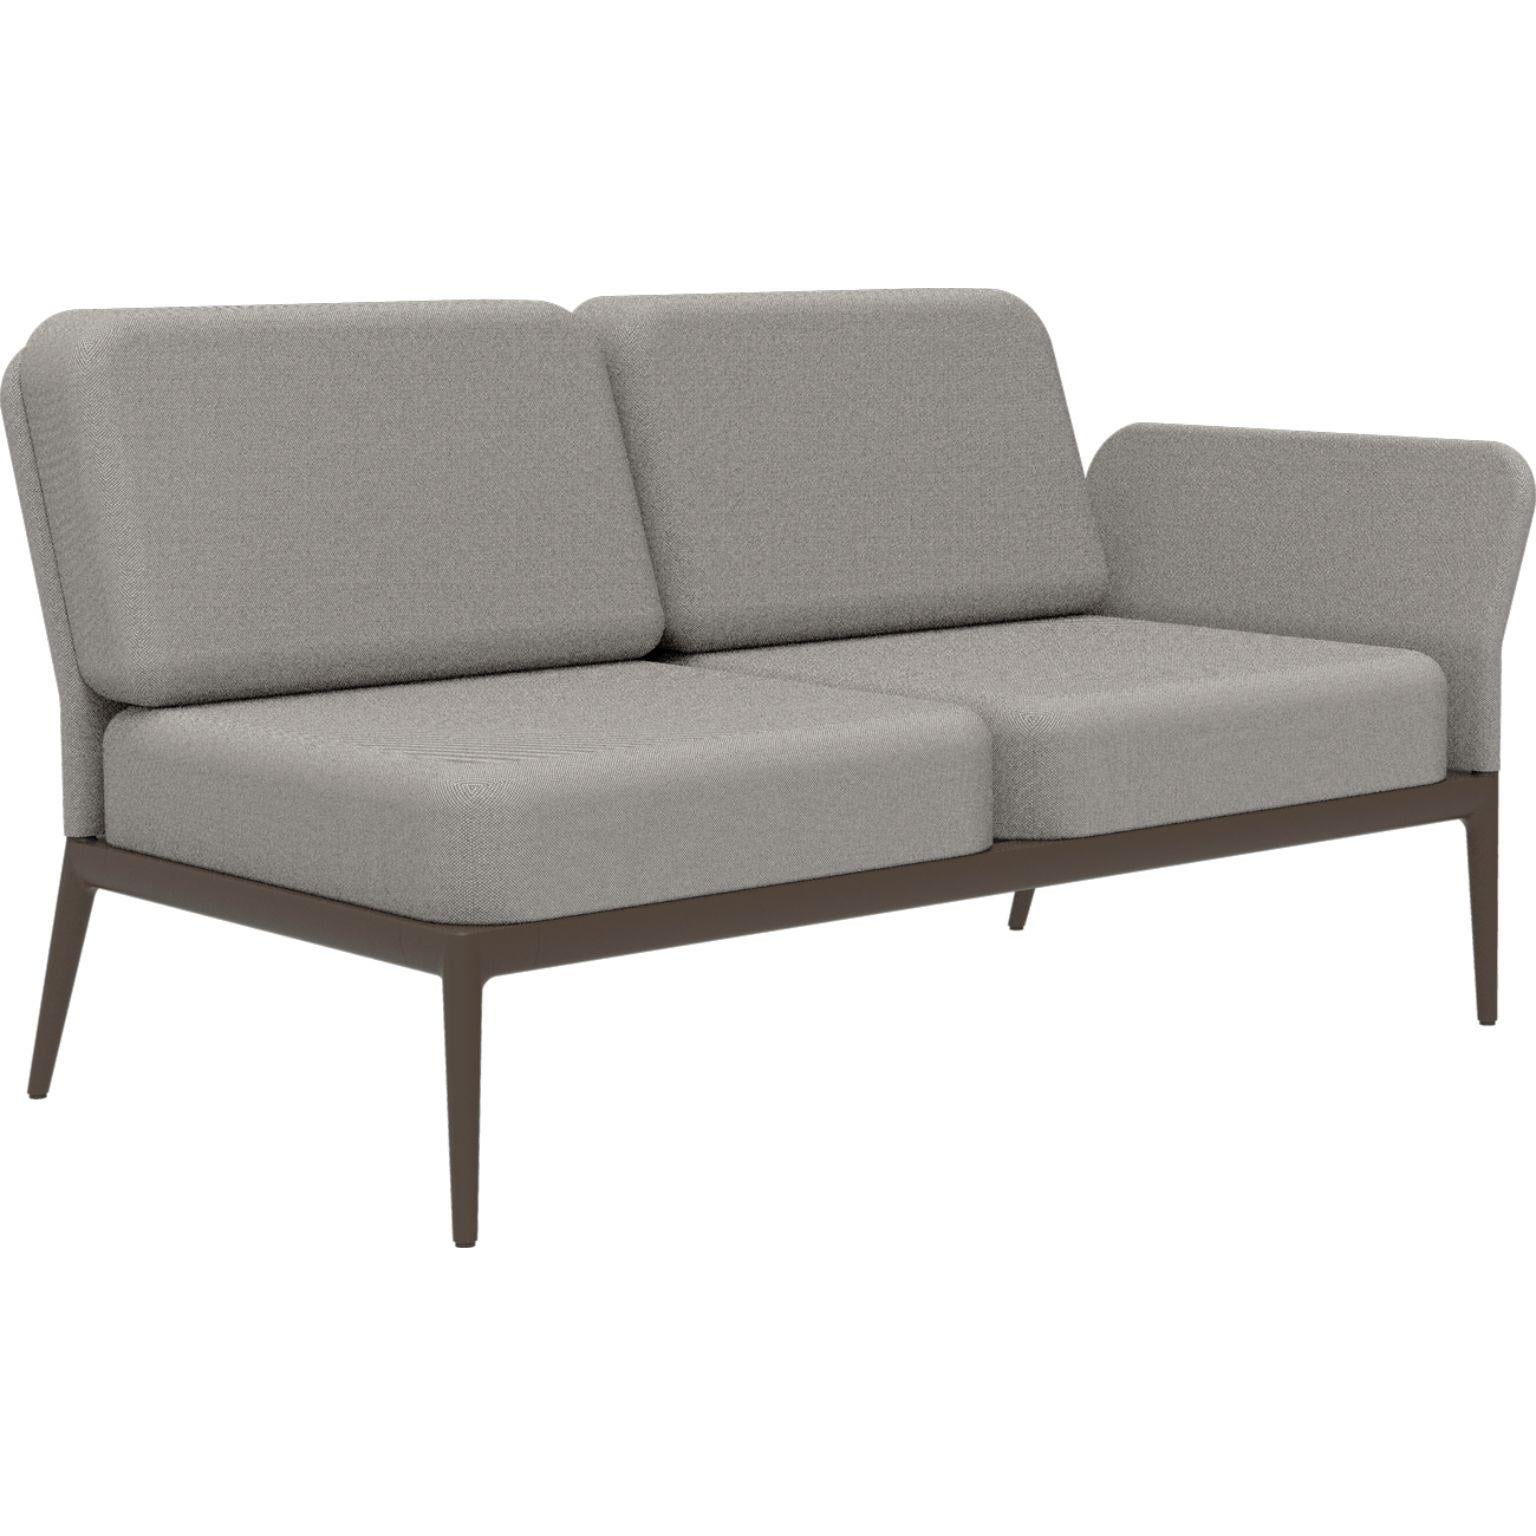 Cover Bronze Double Left Modular Sofa by MOWEE
Dimensions: D83 x W148 x H81 cm (seat height 42 cm)
Material: Aluminum and upholstery.
Weight: 29 kg.
Also available in different colors and finishes. Please contact us.

An unmistakable